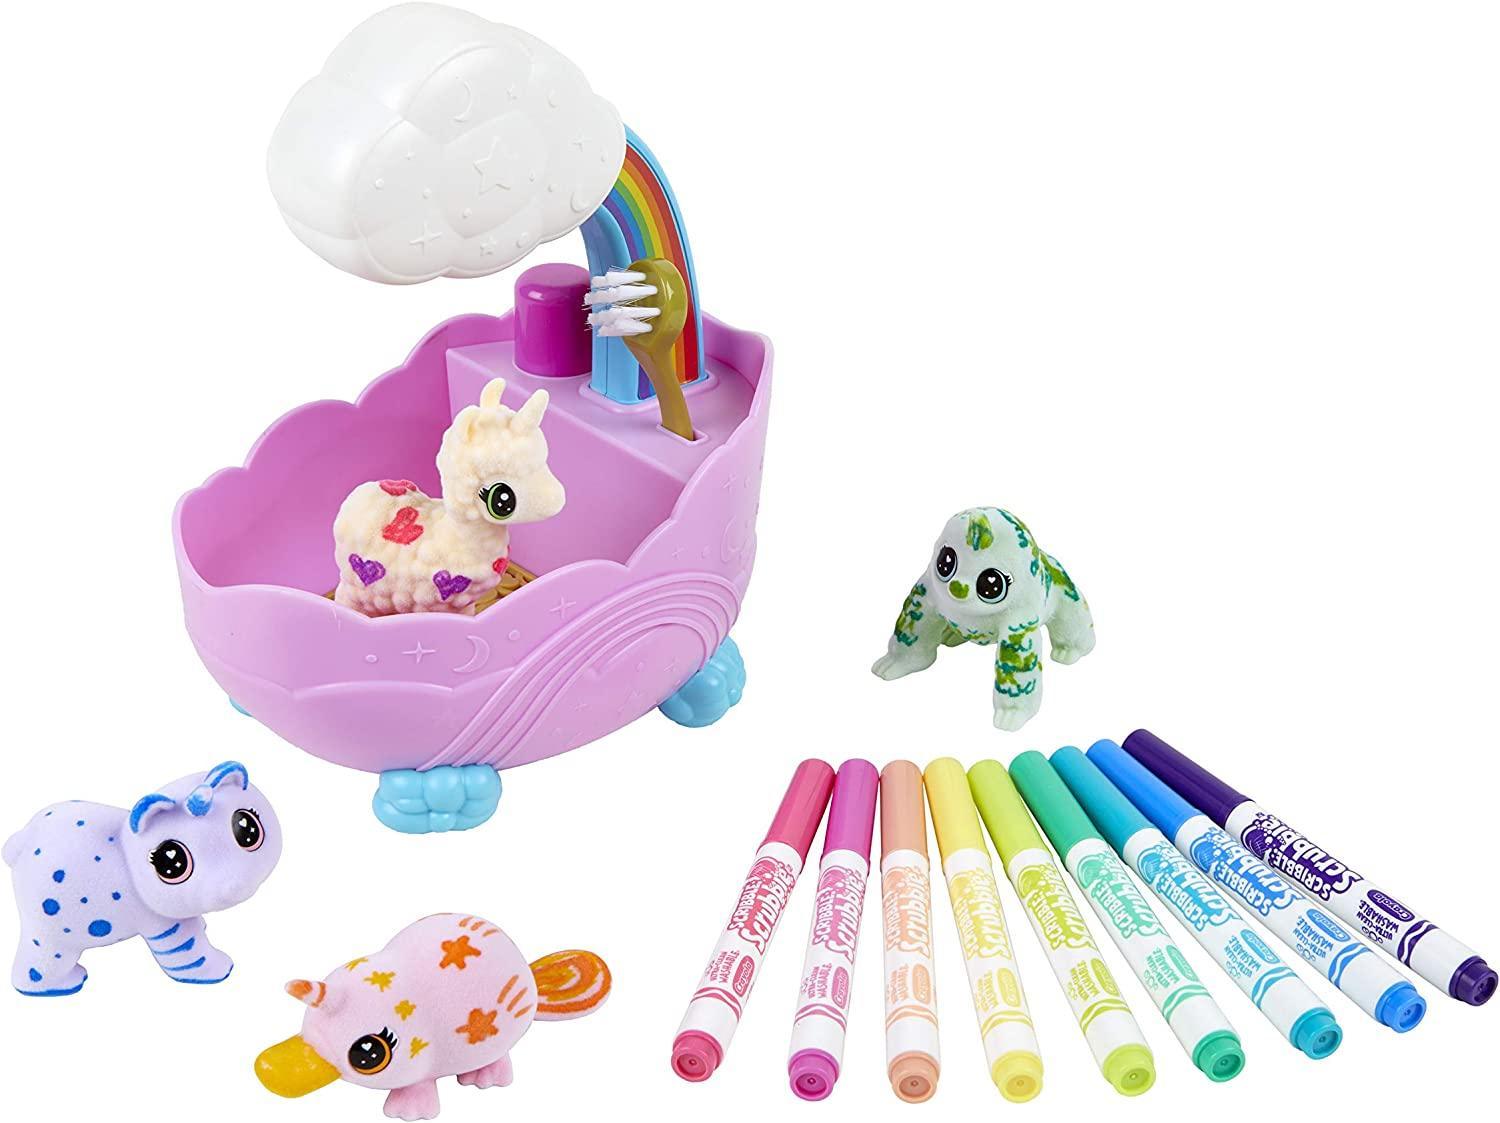 Buy Crayola Washimals, Pet Playset, Creative Gift for Kids, Ages 3